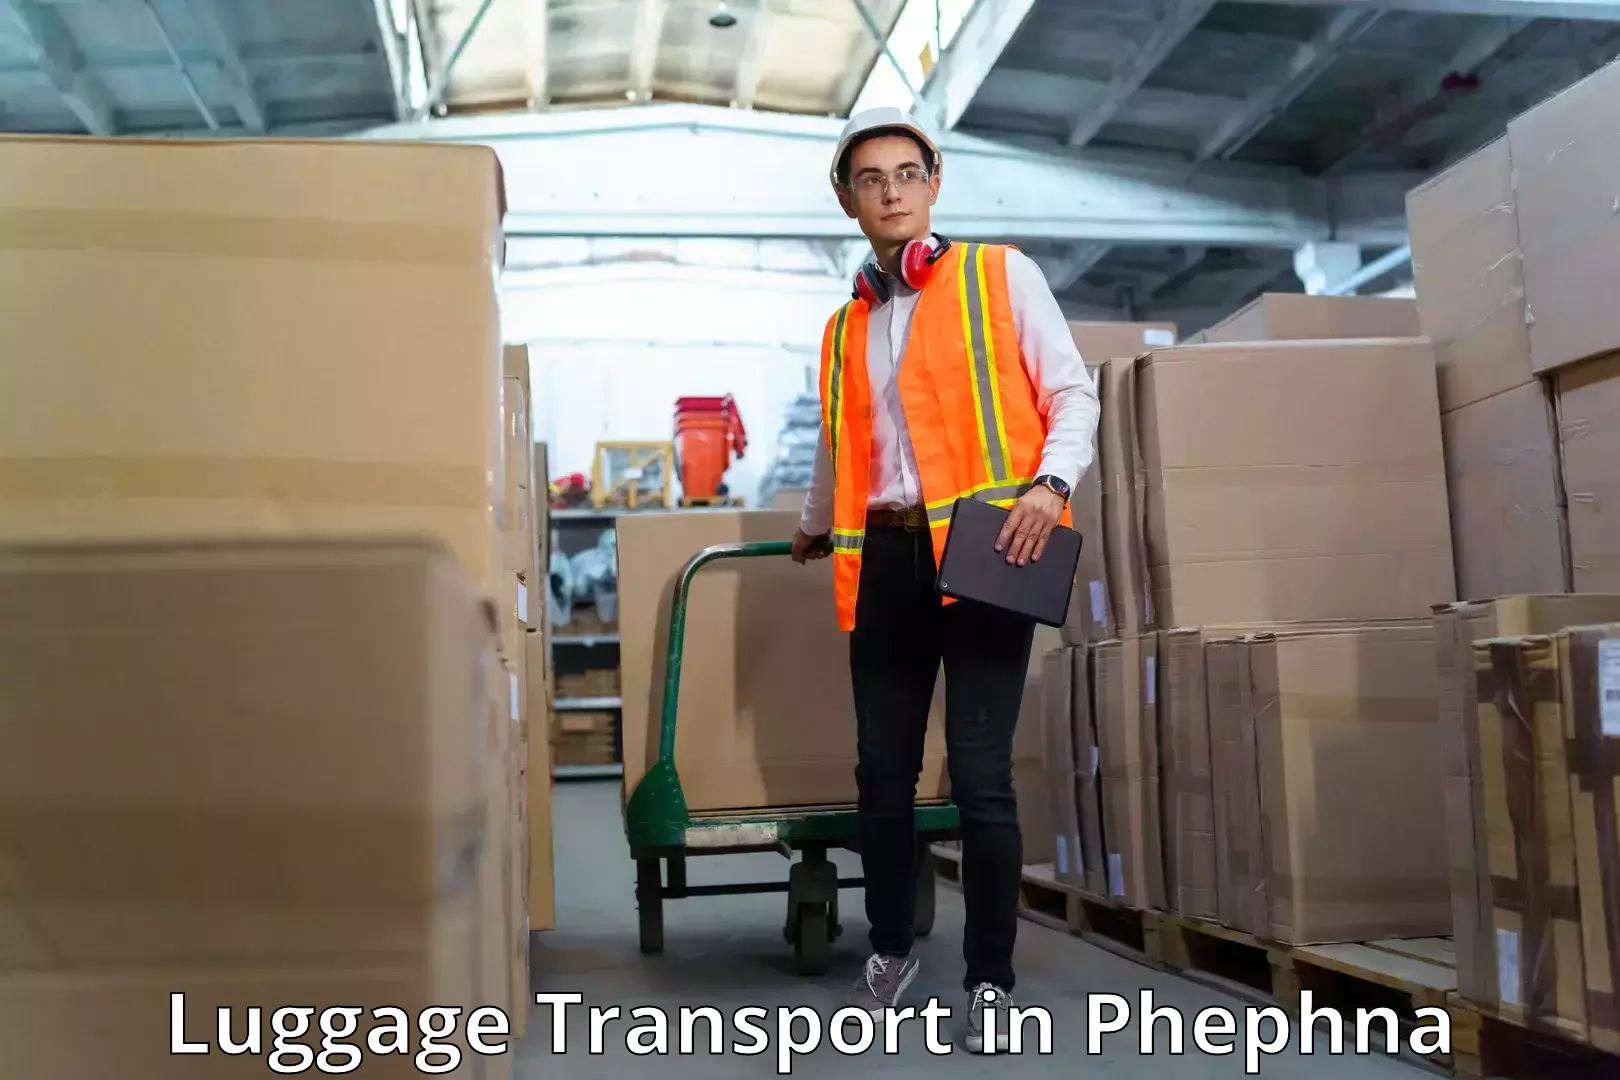 Luggage transport operations in Phephna